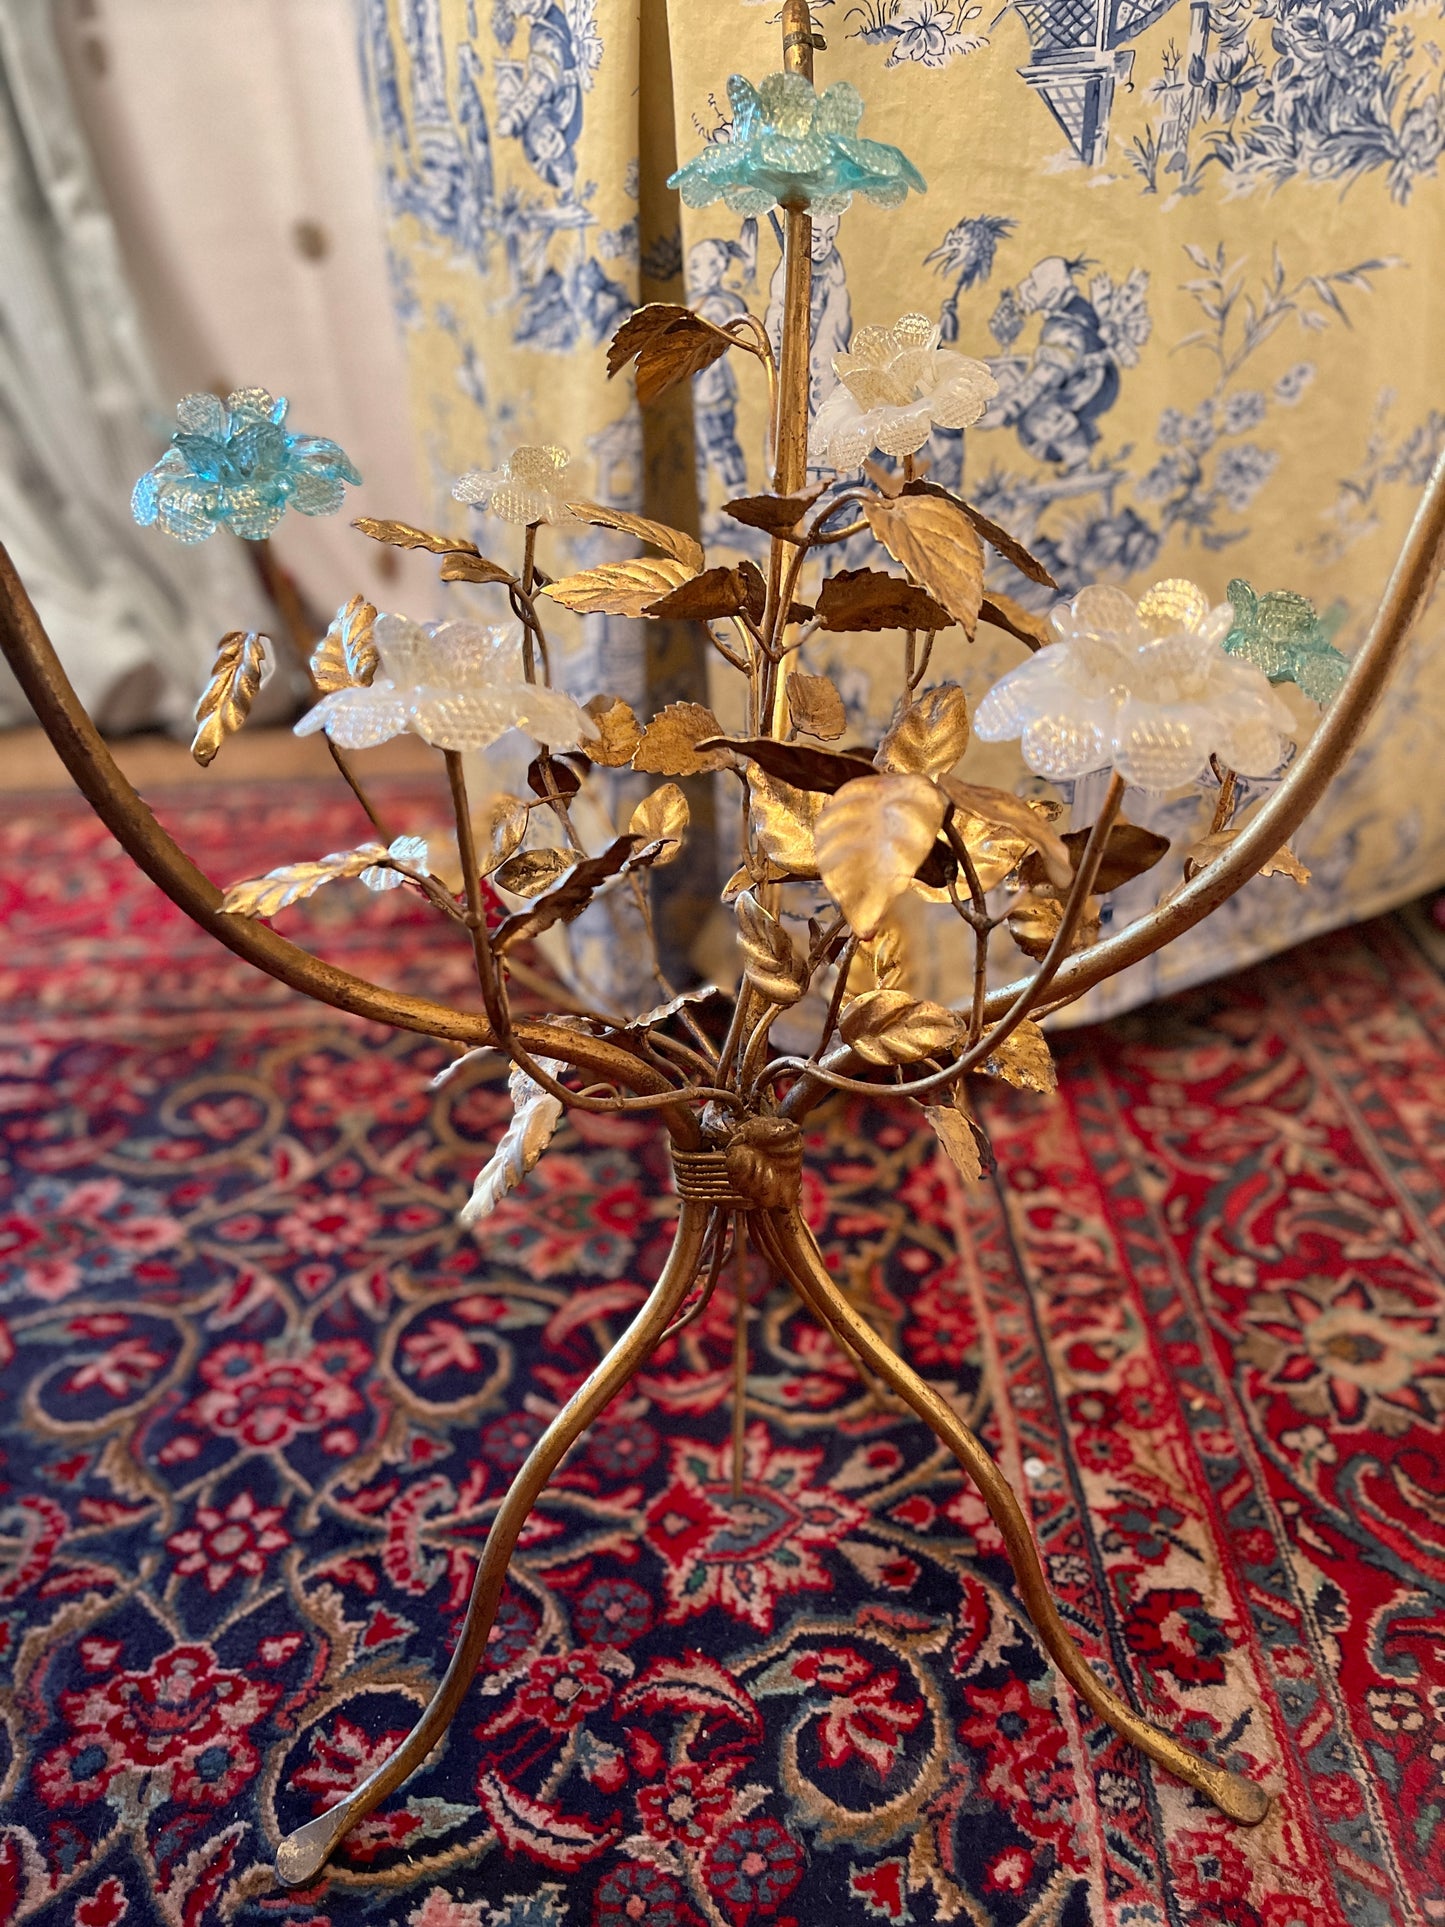 Vintage Italian Gilt Tole Table with Blue and White Murano Glass Flowers, Hollywood Regency Decor